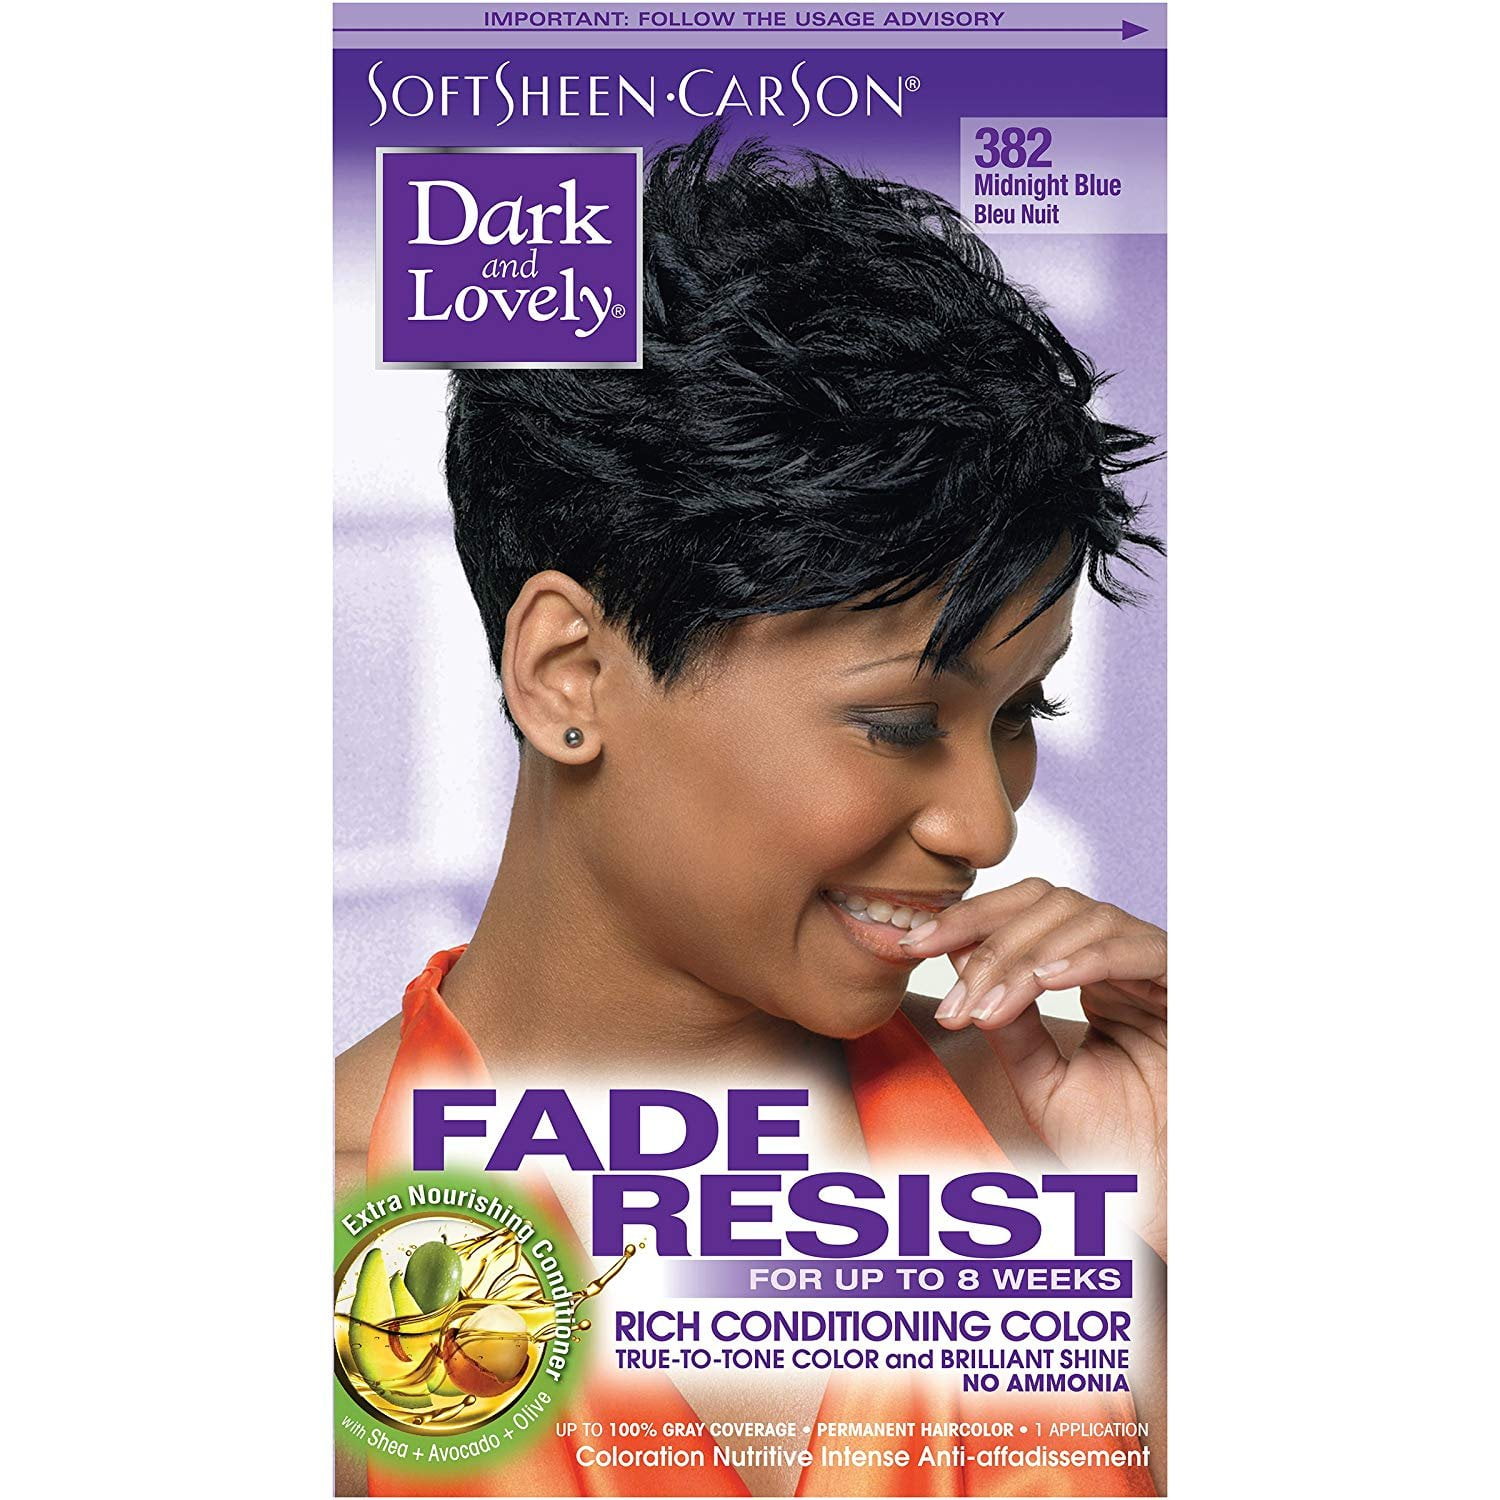 SoftSheen-Carson Dark and Lovely Fade Resist Rich Conditioning Color, Midnight  Blue 382 